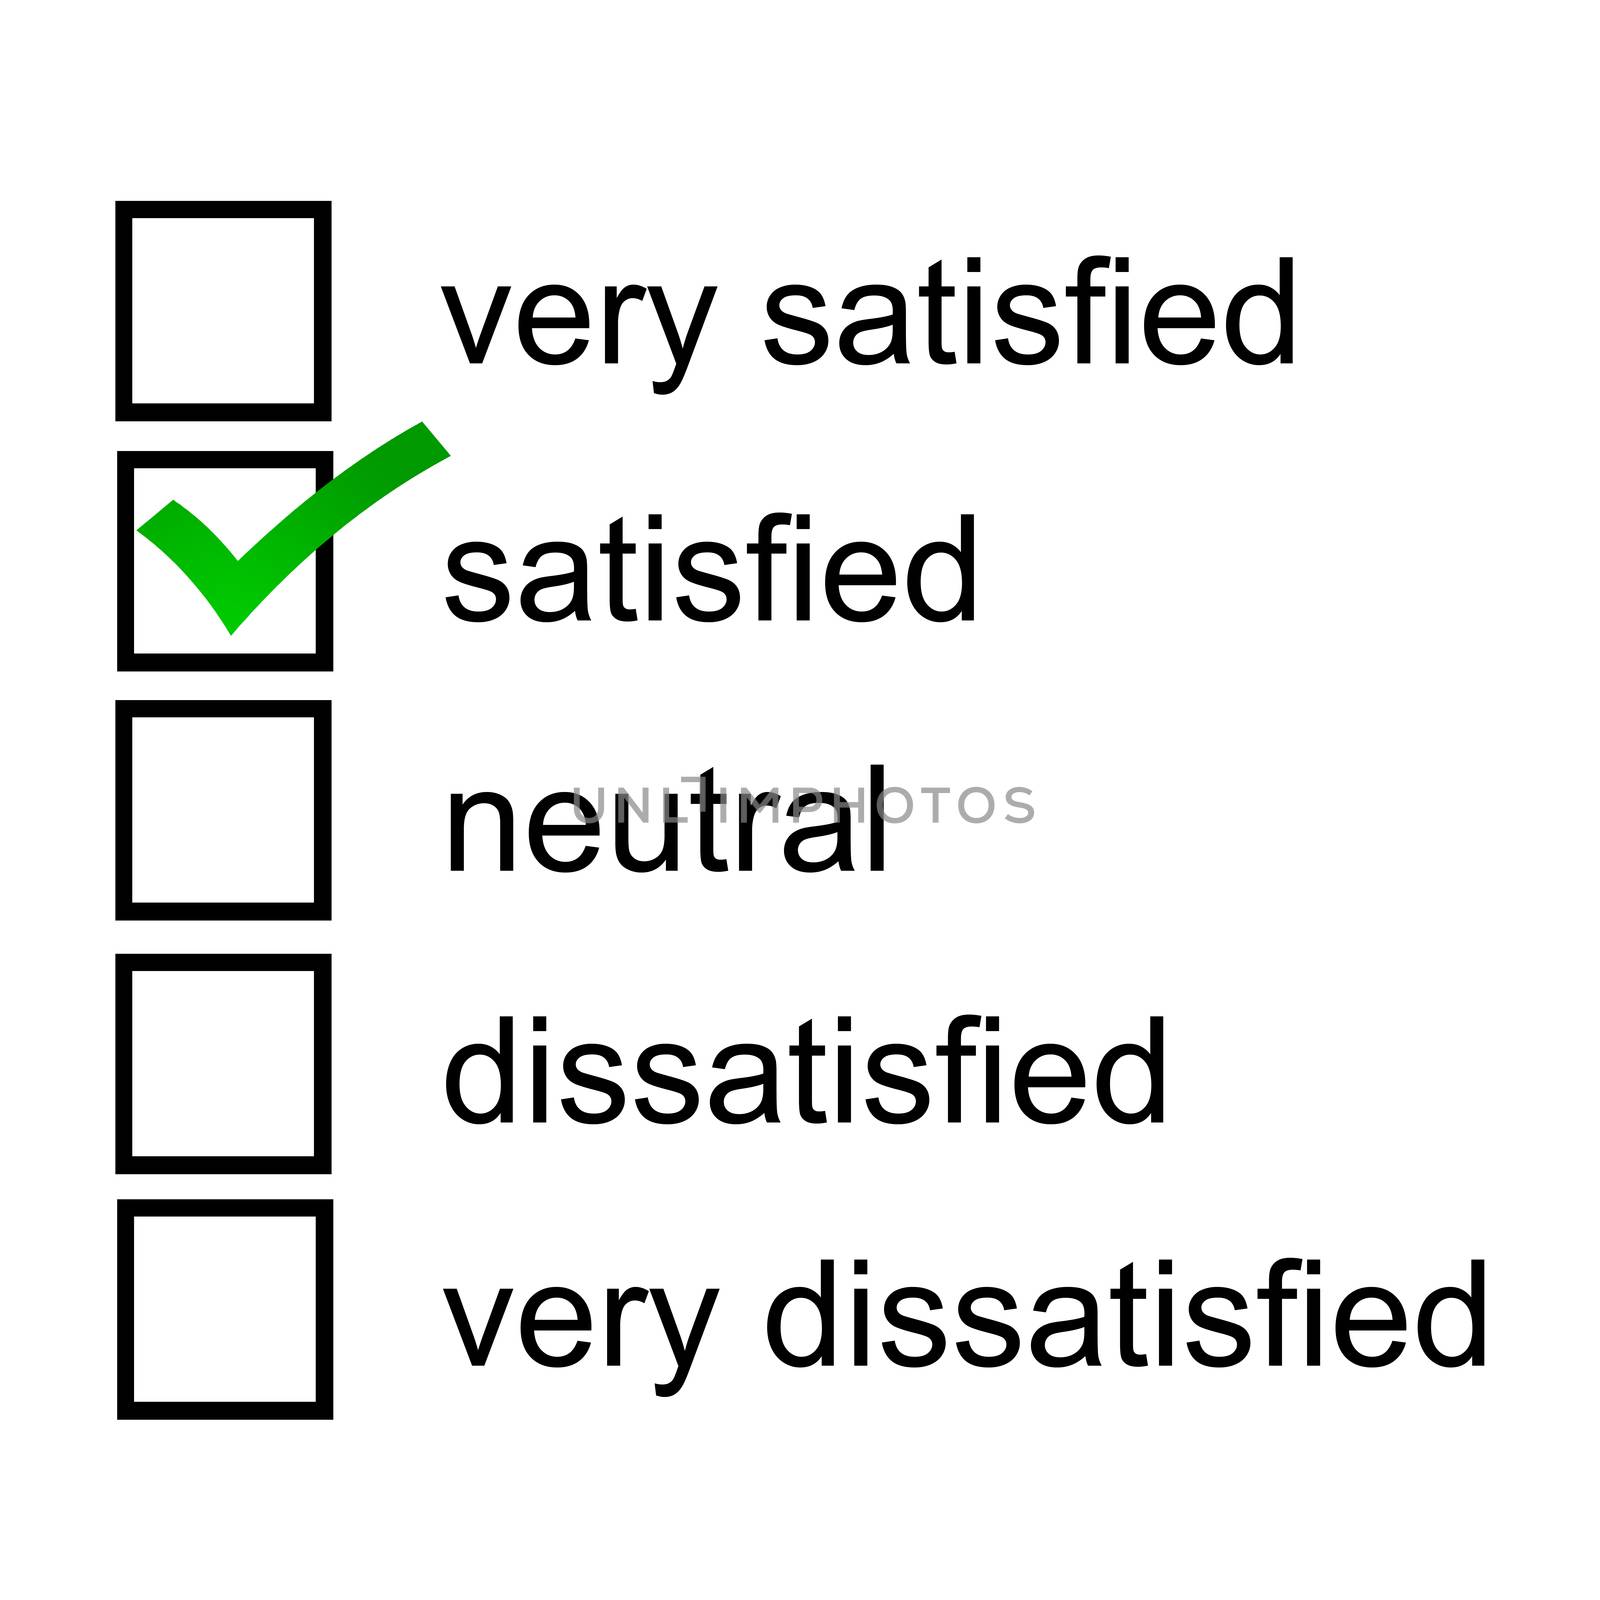 Satisfied client response opinion questionnaire survey likert sc by VivacityImages